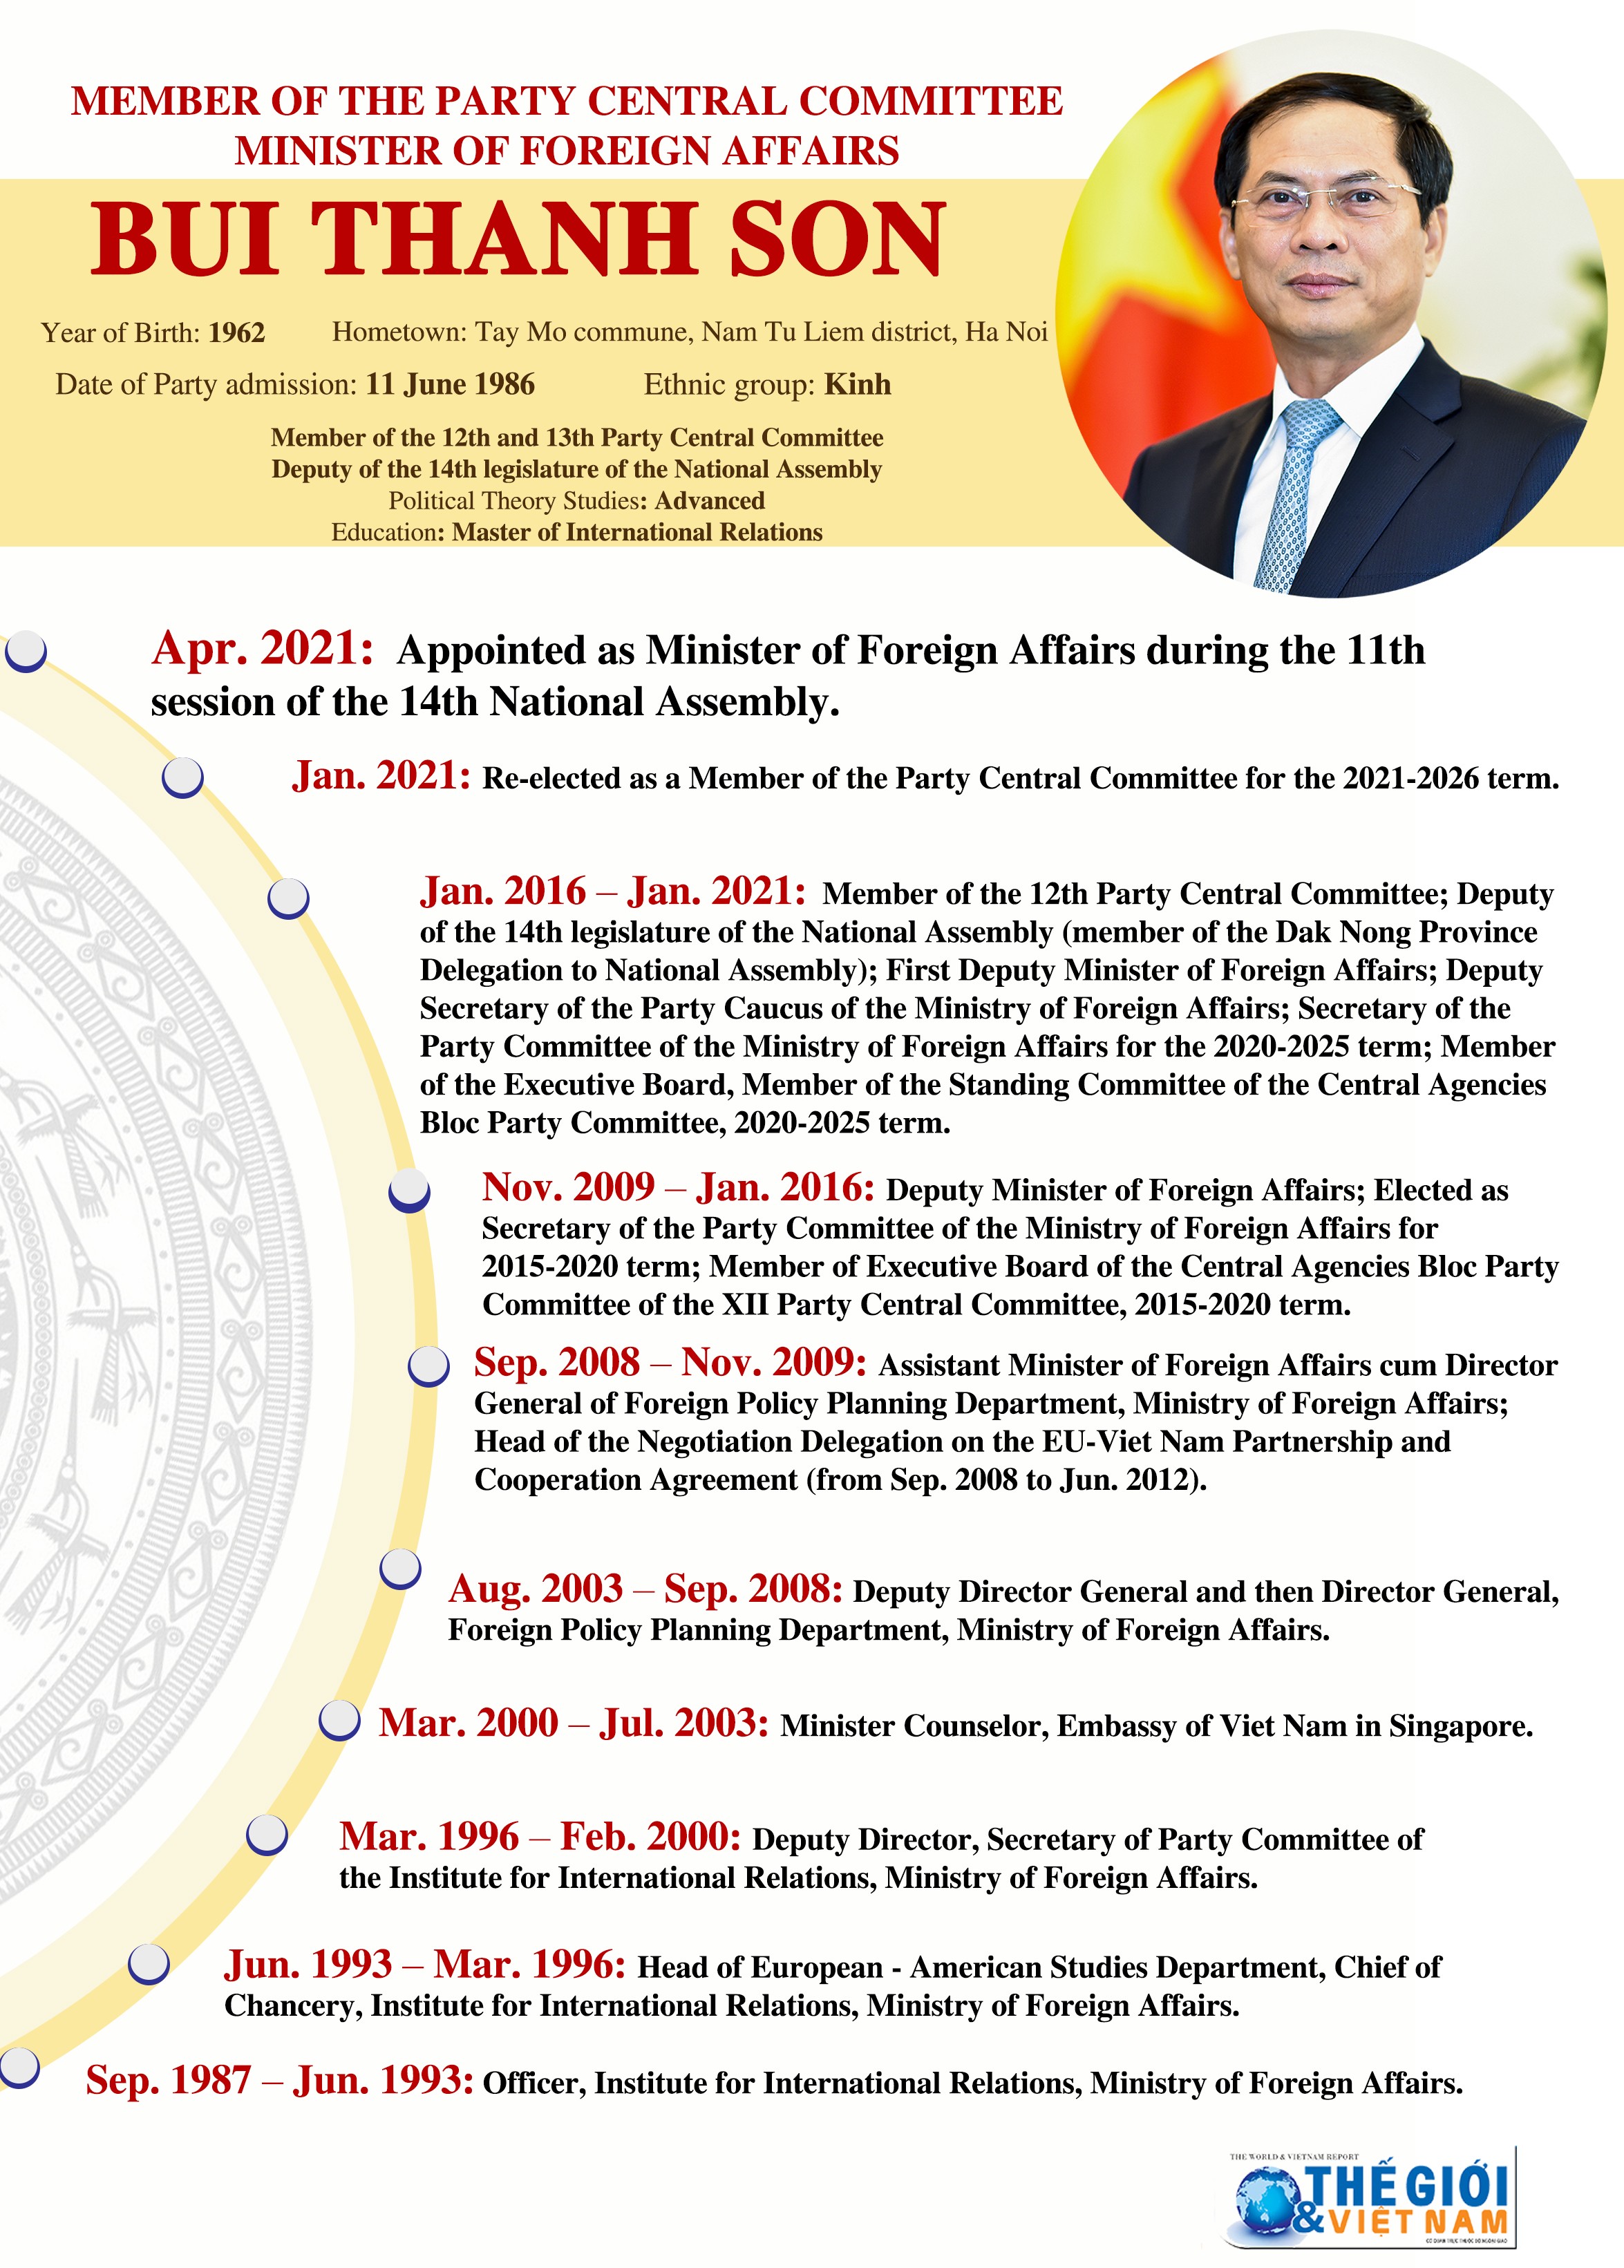 (Inforgraphic) Minister of Foreign Affairs Bui Thanh Son